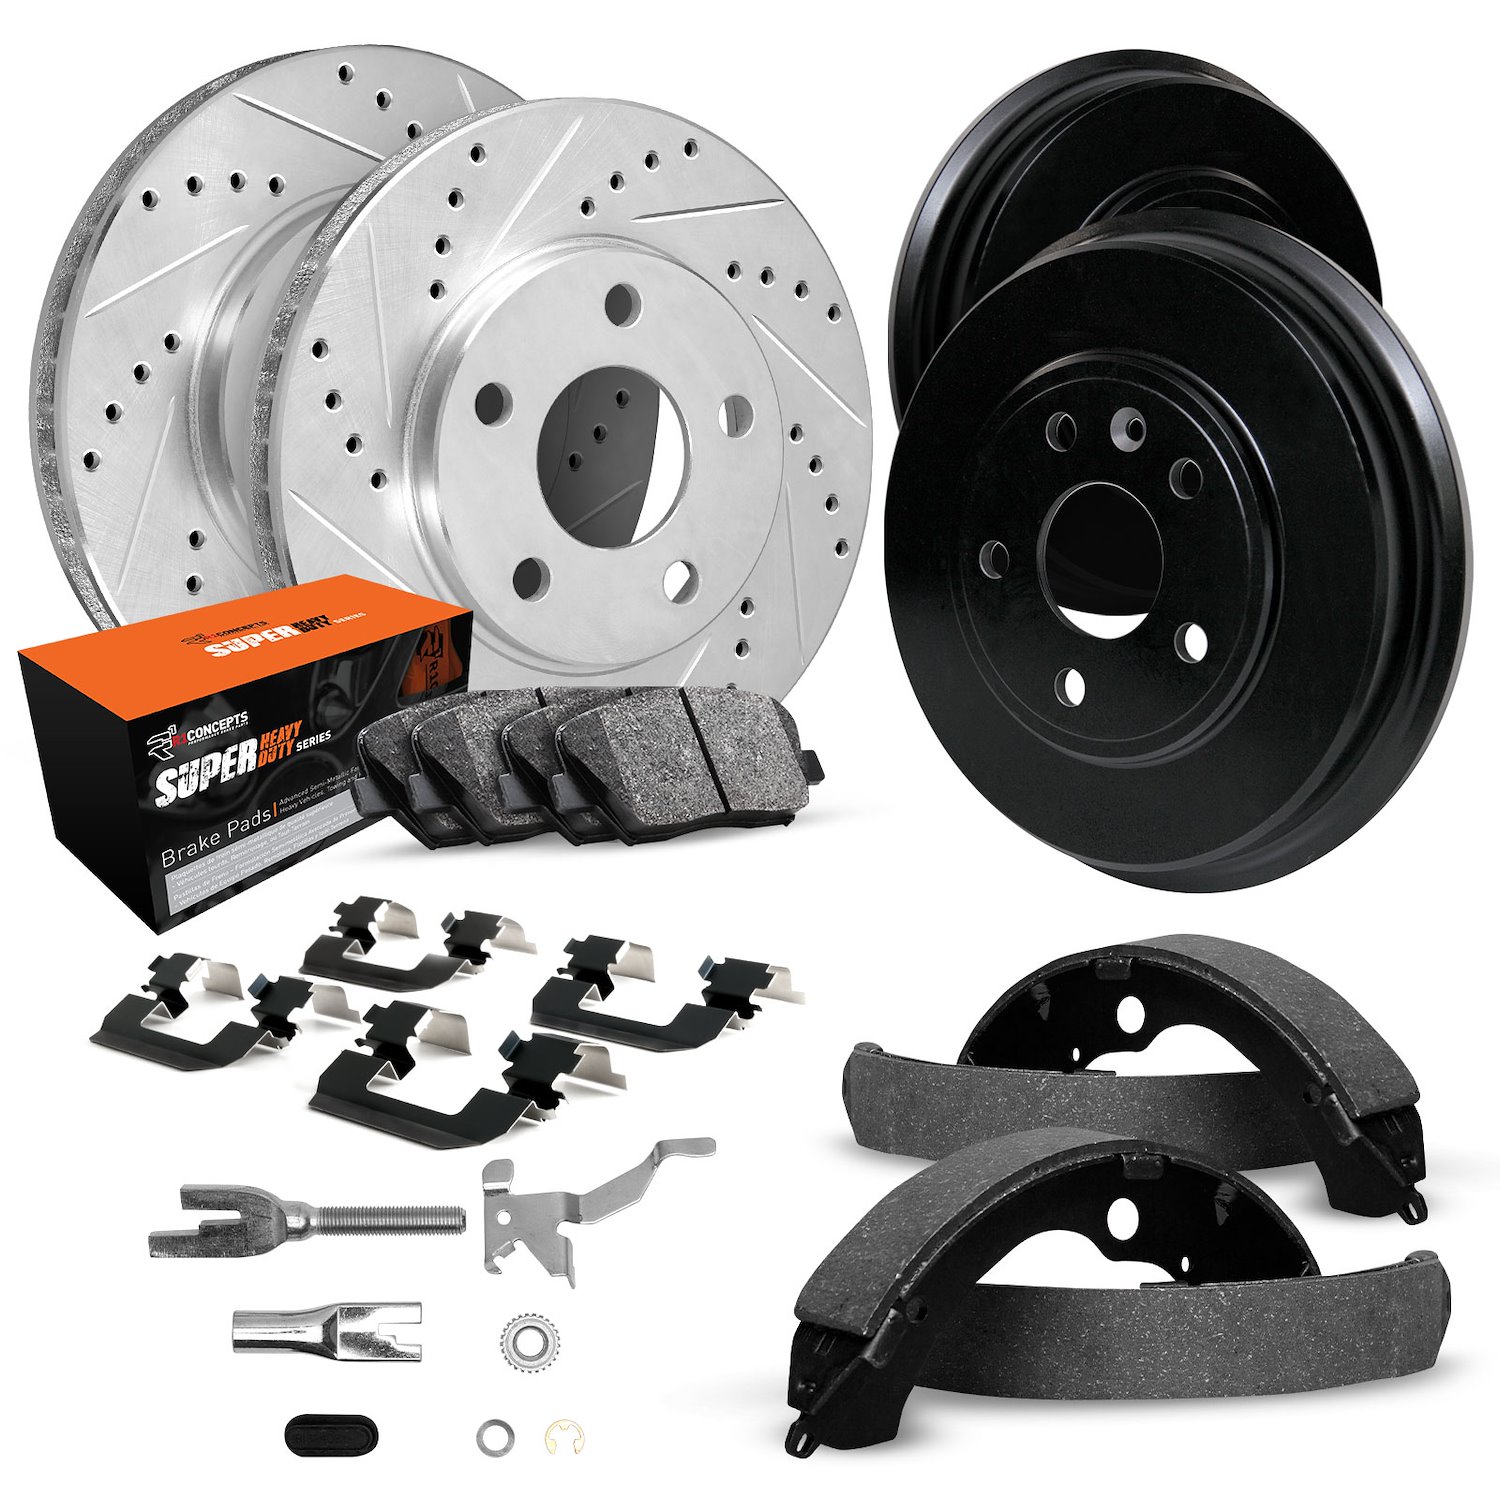 E-Line Drilled/Slotted Silver Rotor & Drum Set w/Super-Duty Pads, Shoes/Hardware/Adjusters, 1974-1977 Mopar